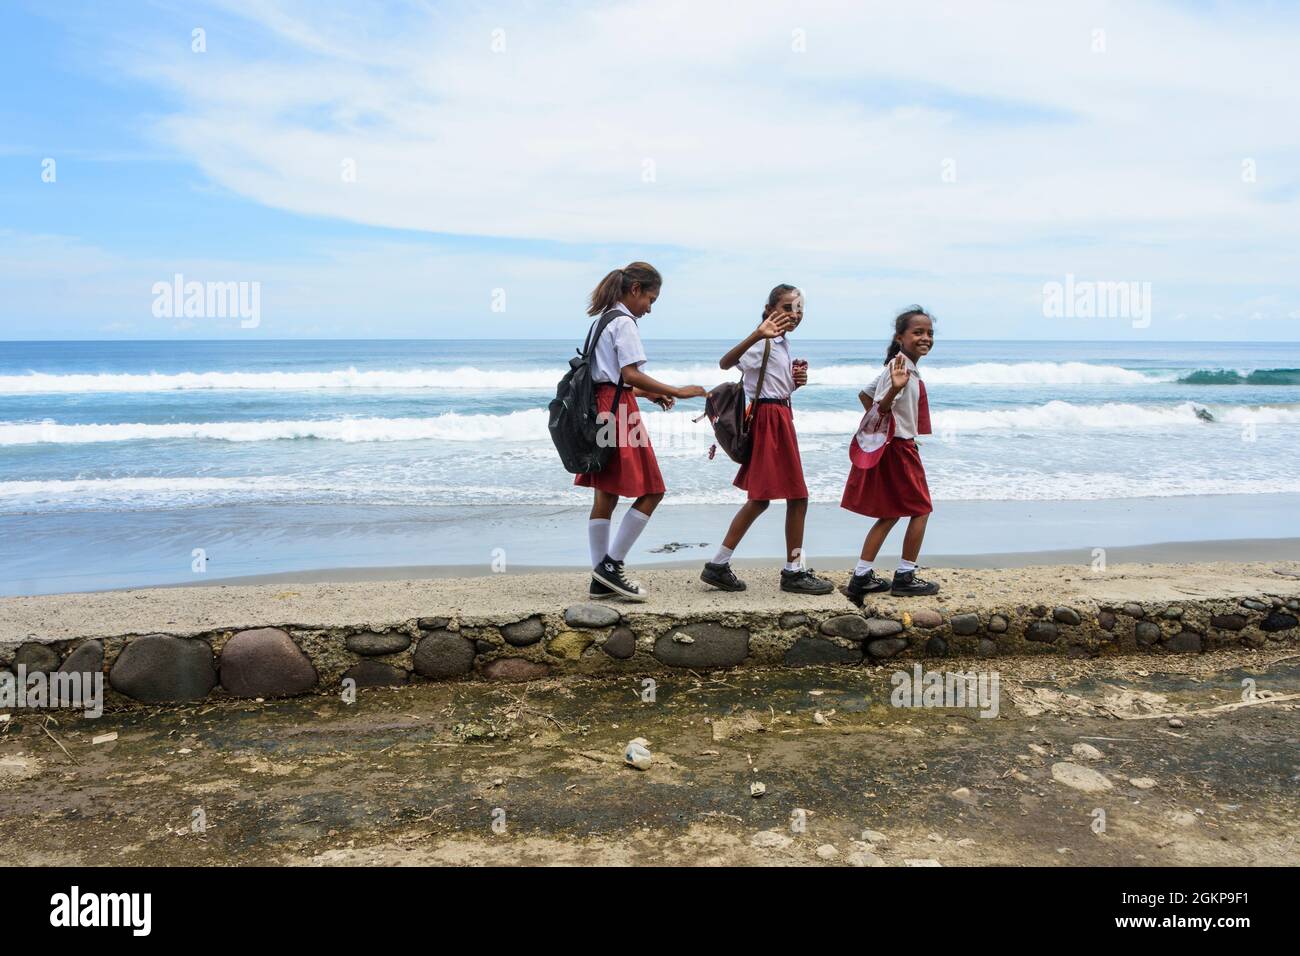 Three joyous school girls in red and white school uniforms returning home from school. Sikka village, Flores island, East Nusa Tenggara, Indonesia. Stock Photo